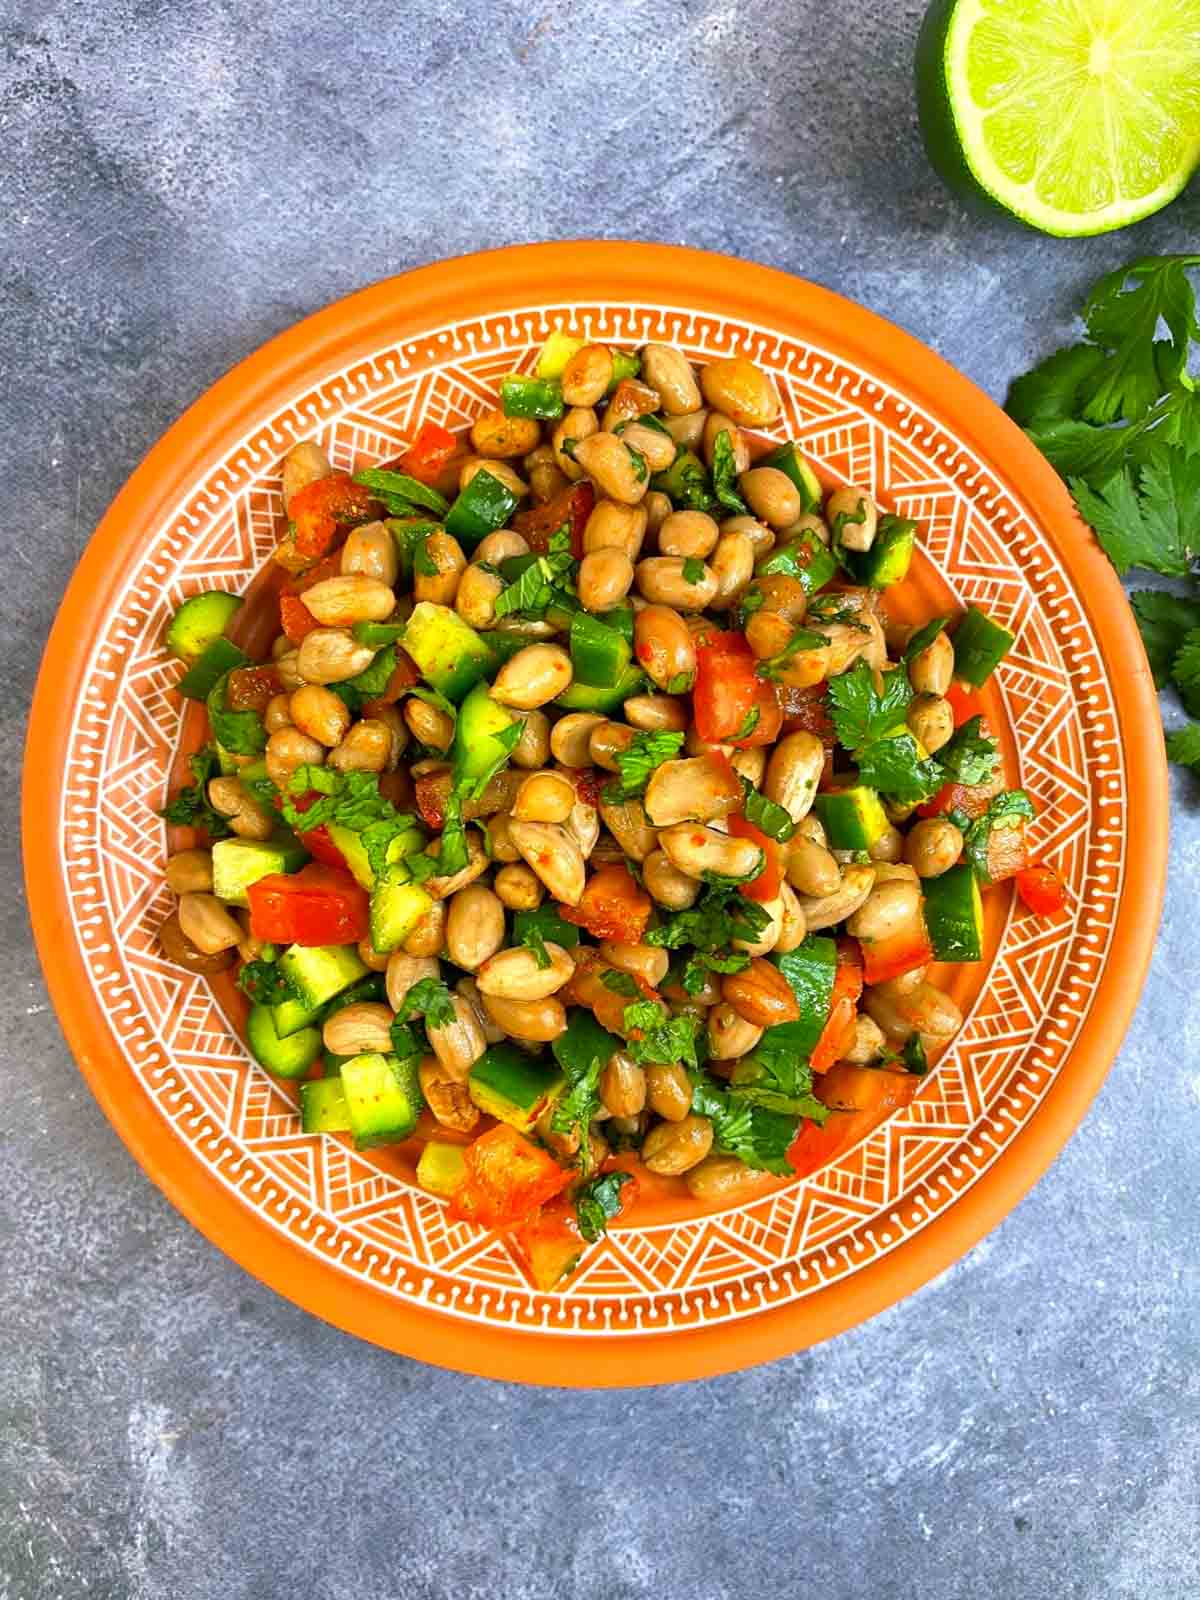 Boiled peanut salad/chaat served on a plate with cilantro and lemon on the side